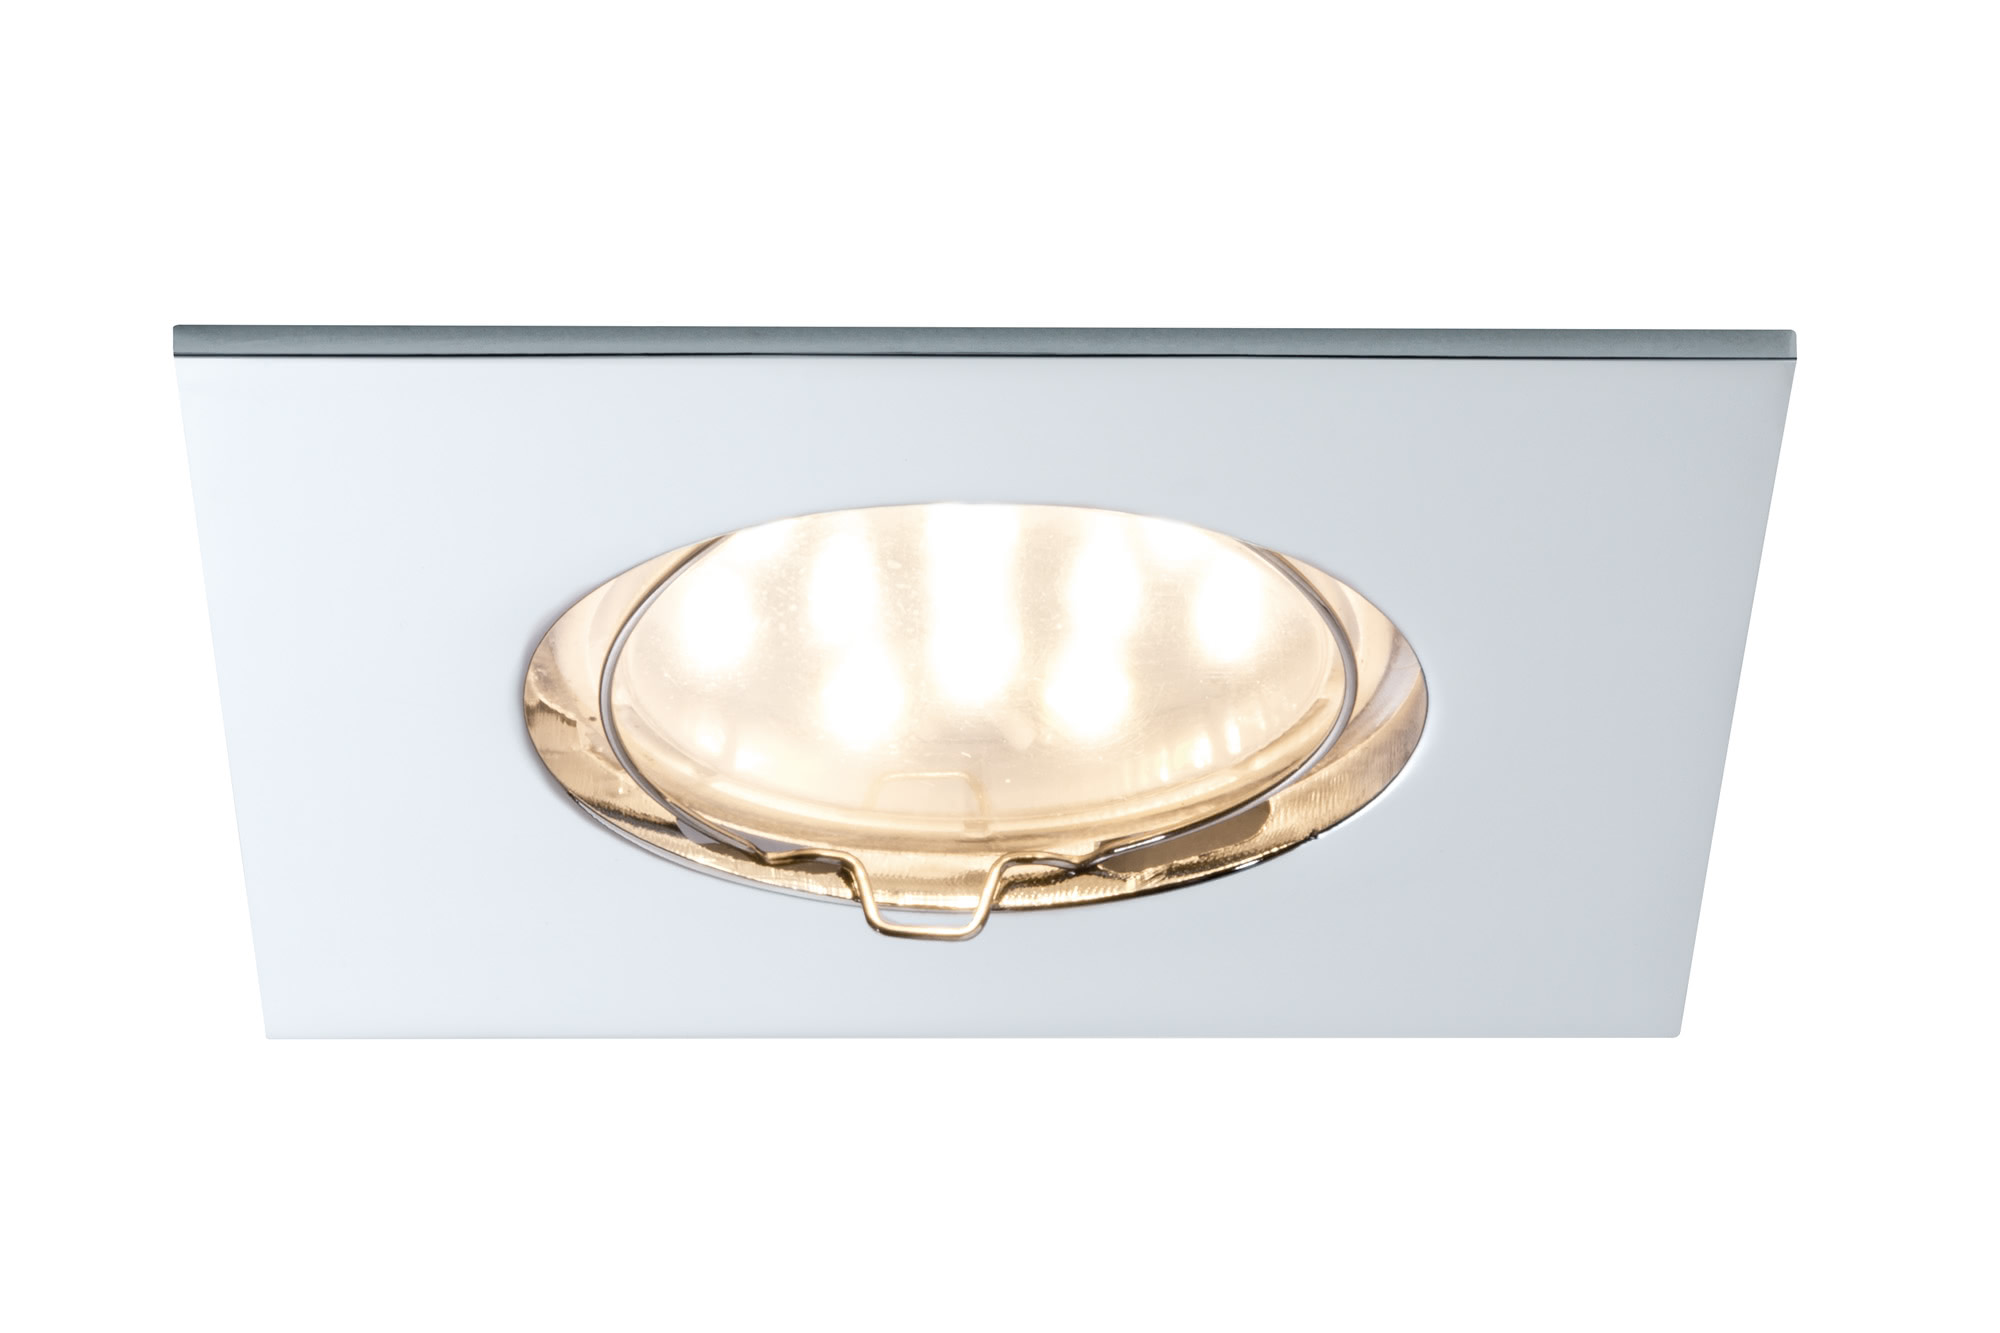 92763 EBL Coin LED 3x6,5W 51mm eckig Chrom The Coins are innovative and user-friendly recessed spotlights that are suitable for new installations as well as replacing existing installations. Since they are exceptionally flat, they can be installed in ceilings with a cavity of only 30 to 35В millimetres. From 50В centimetres to 5В metres or more вЂ“ you determine the spacing between the lights! The simple and tool-free linking of single luminaires using quick clips save more than just time and stress вЂ“ thanks to energy-efficient LED technology with very lower power consumption, the Coins are also easy on the wallet. 927.63 Paulmann